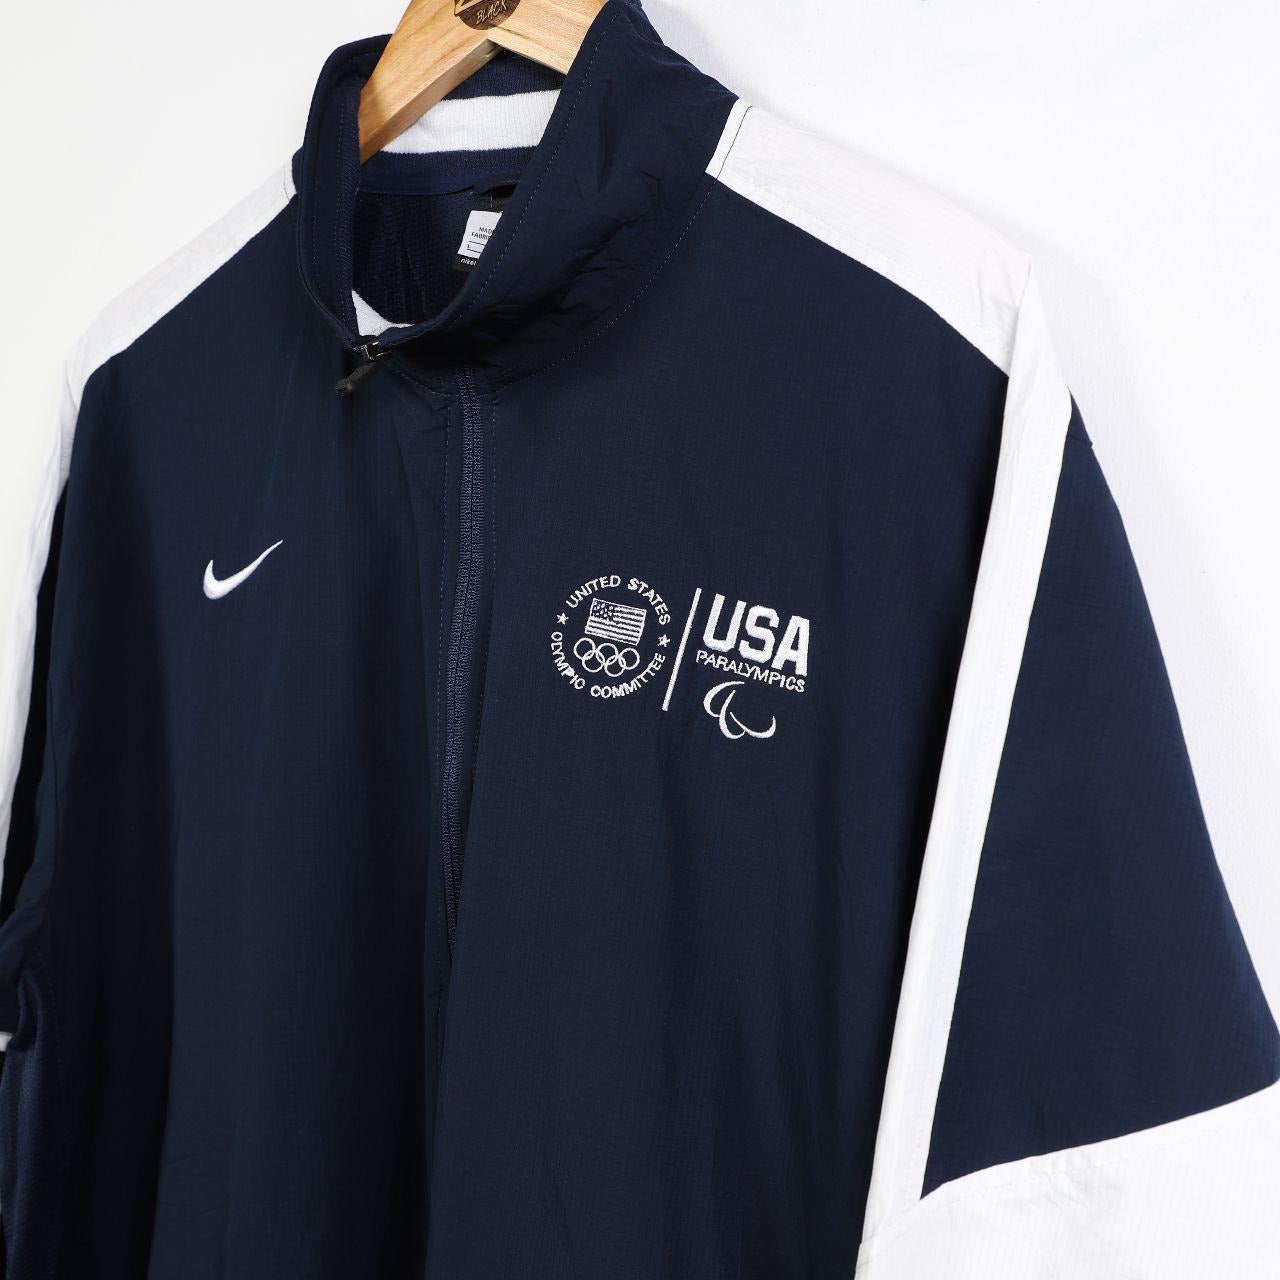 Nike U.S.A Paralympic Olympic Committee Team Jacket